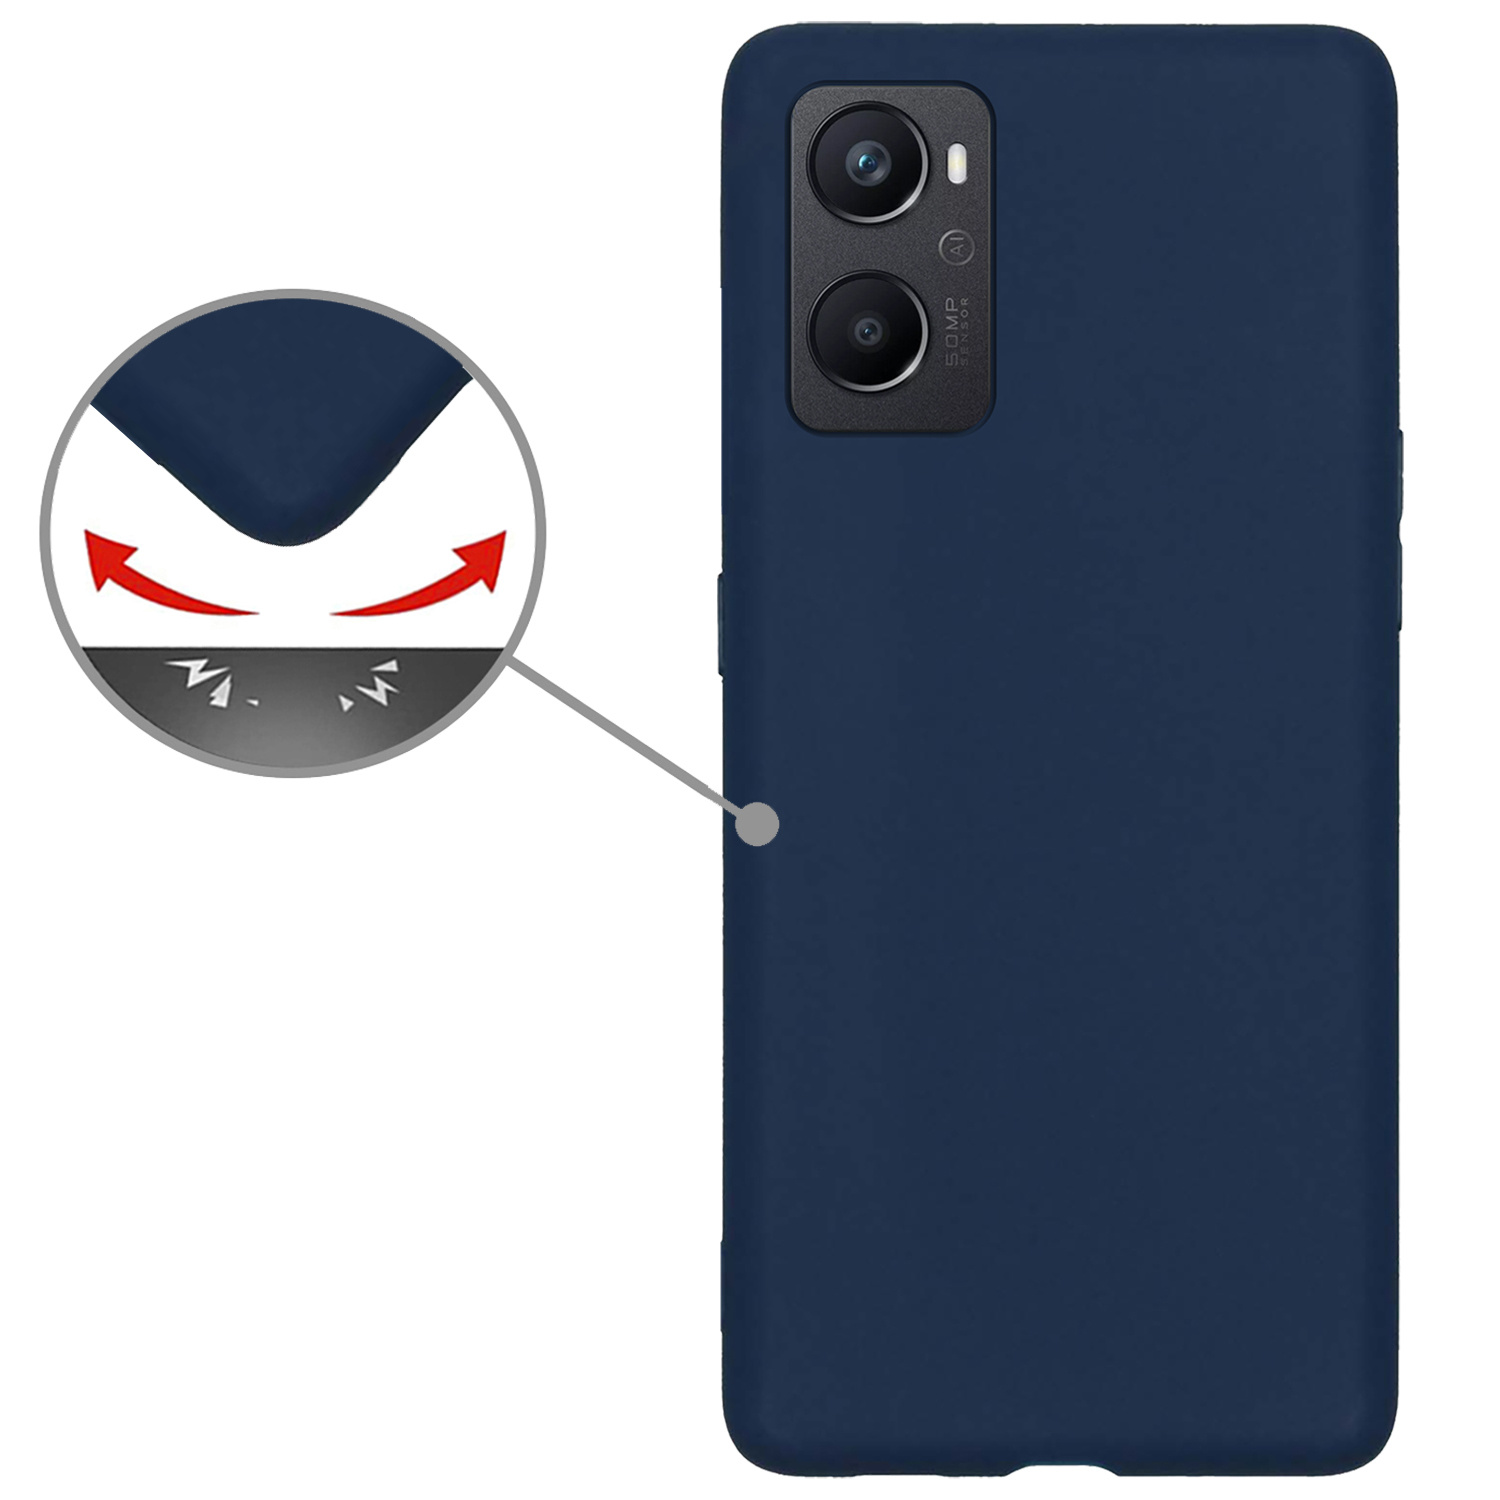 Nomfy OPPO A96 Hoesje Siliconen - OPPO A96 Hoesje Donker Blauw Case - OPPO A96 Cover Siliconen Back Cover -Donker Blauw